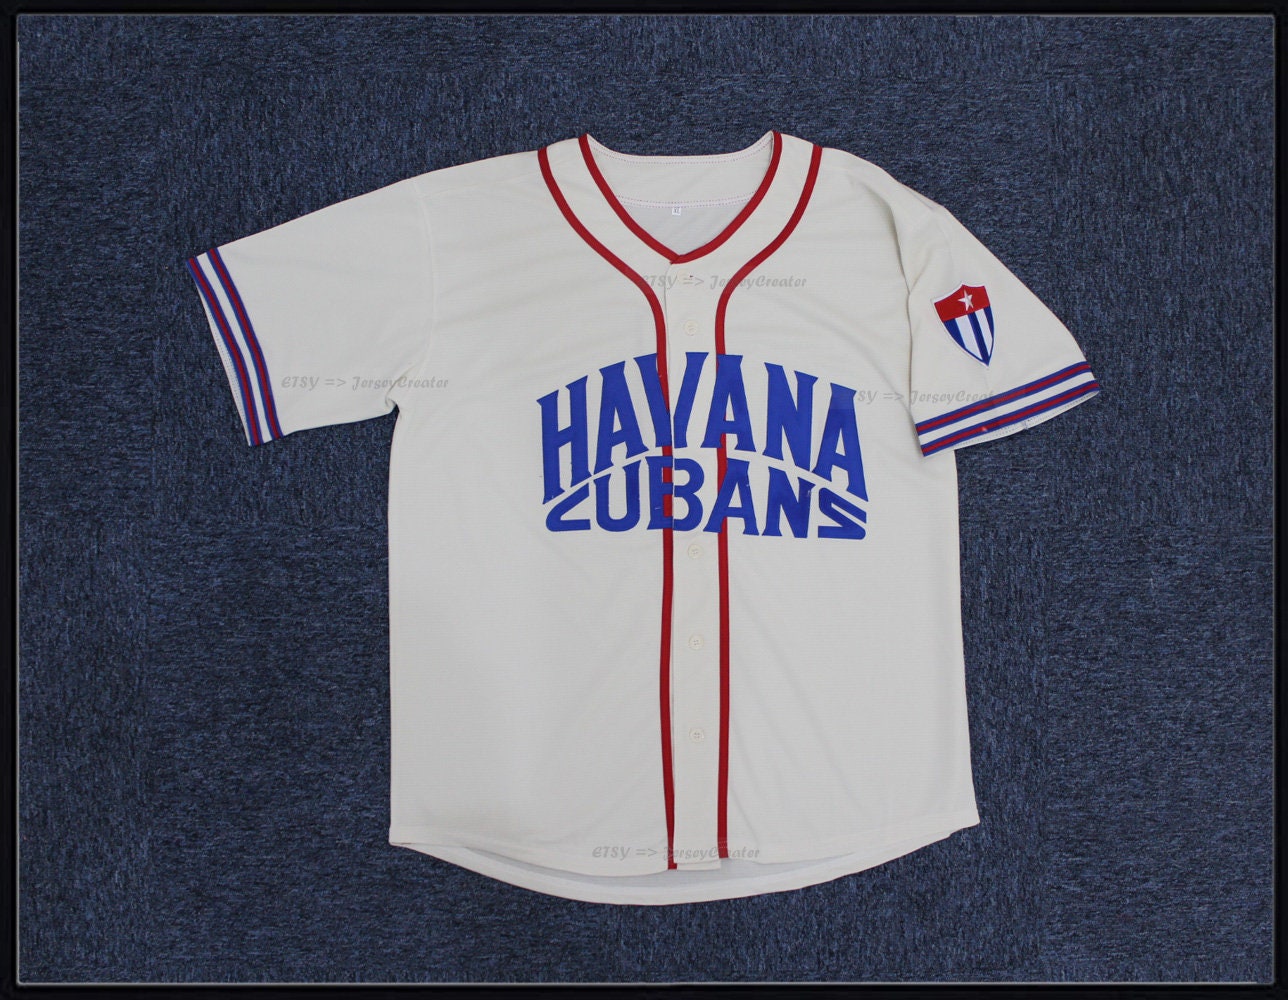 Personalized Cubs Bugs Jersey - Navy City Connect - Pullama